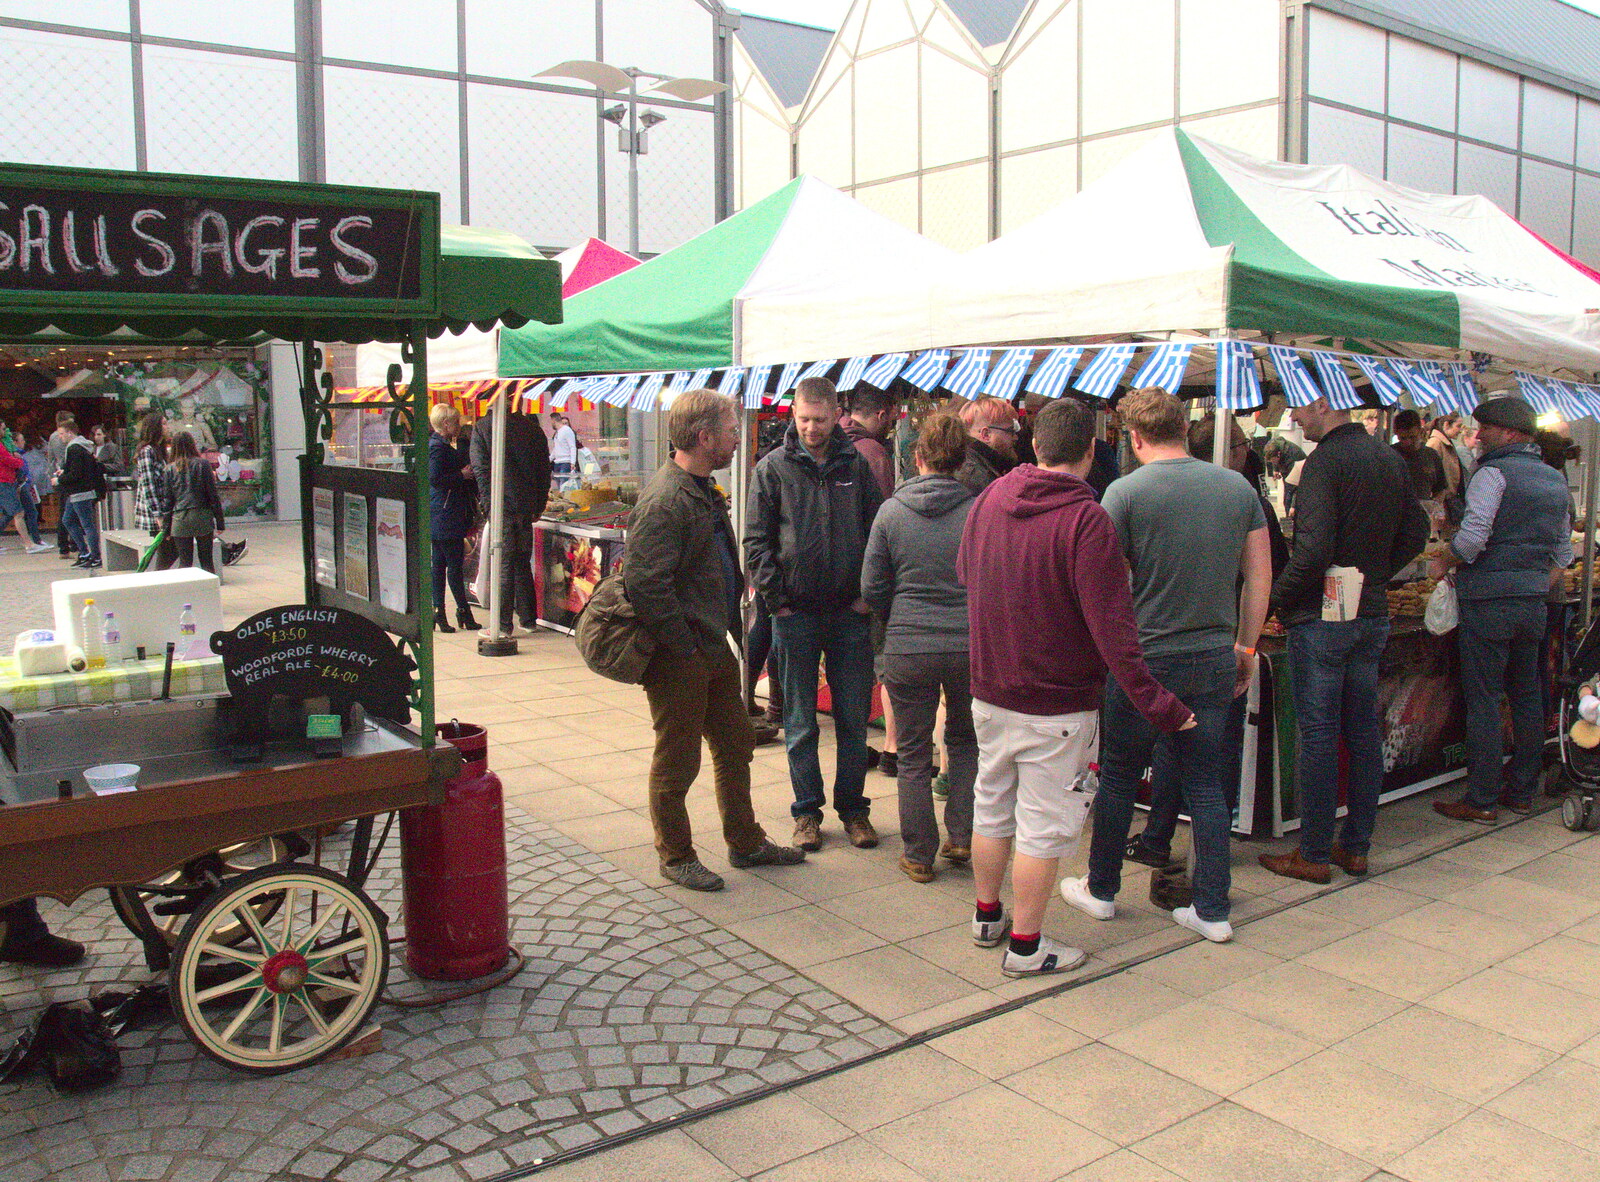 We wander outside for some street food from The East Anglian Beer Festival, Bury St Edmunds, Suffolk - 23rd April 2016